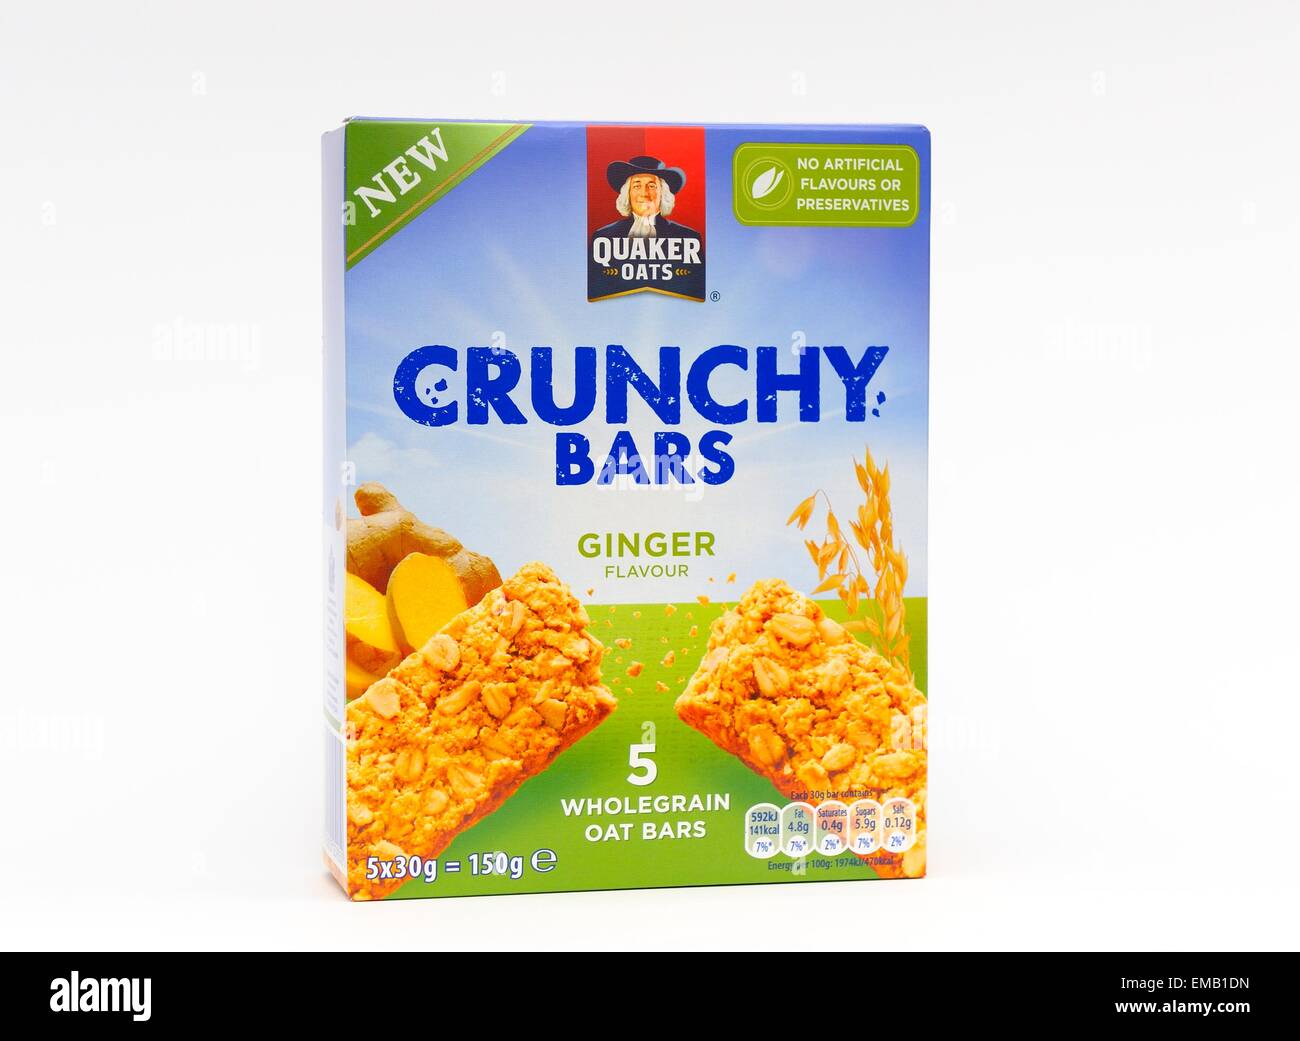 Quaker oats crunchy bars ginger flavour Stock Photo